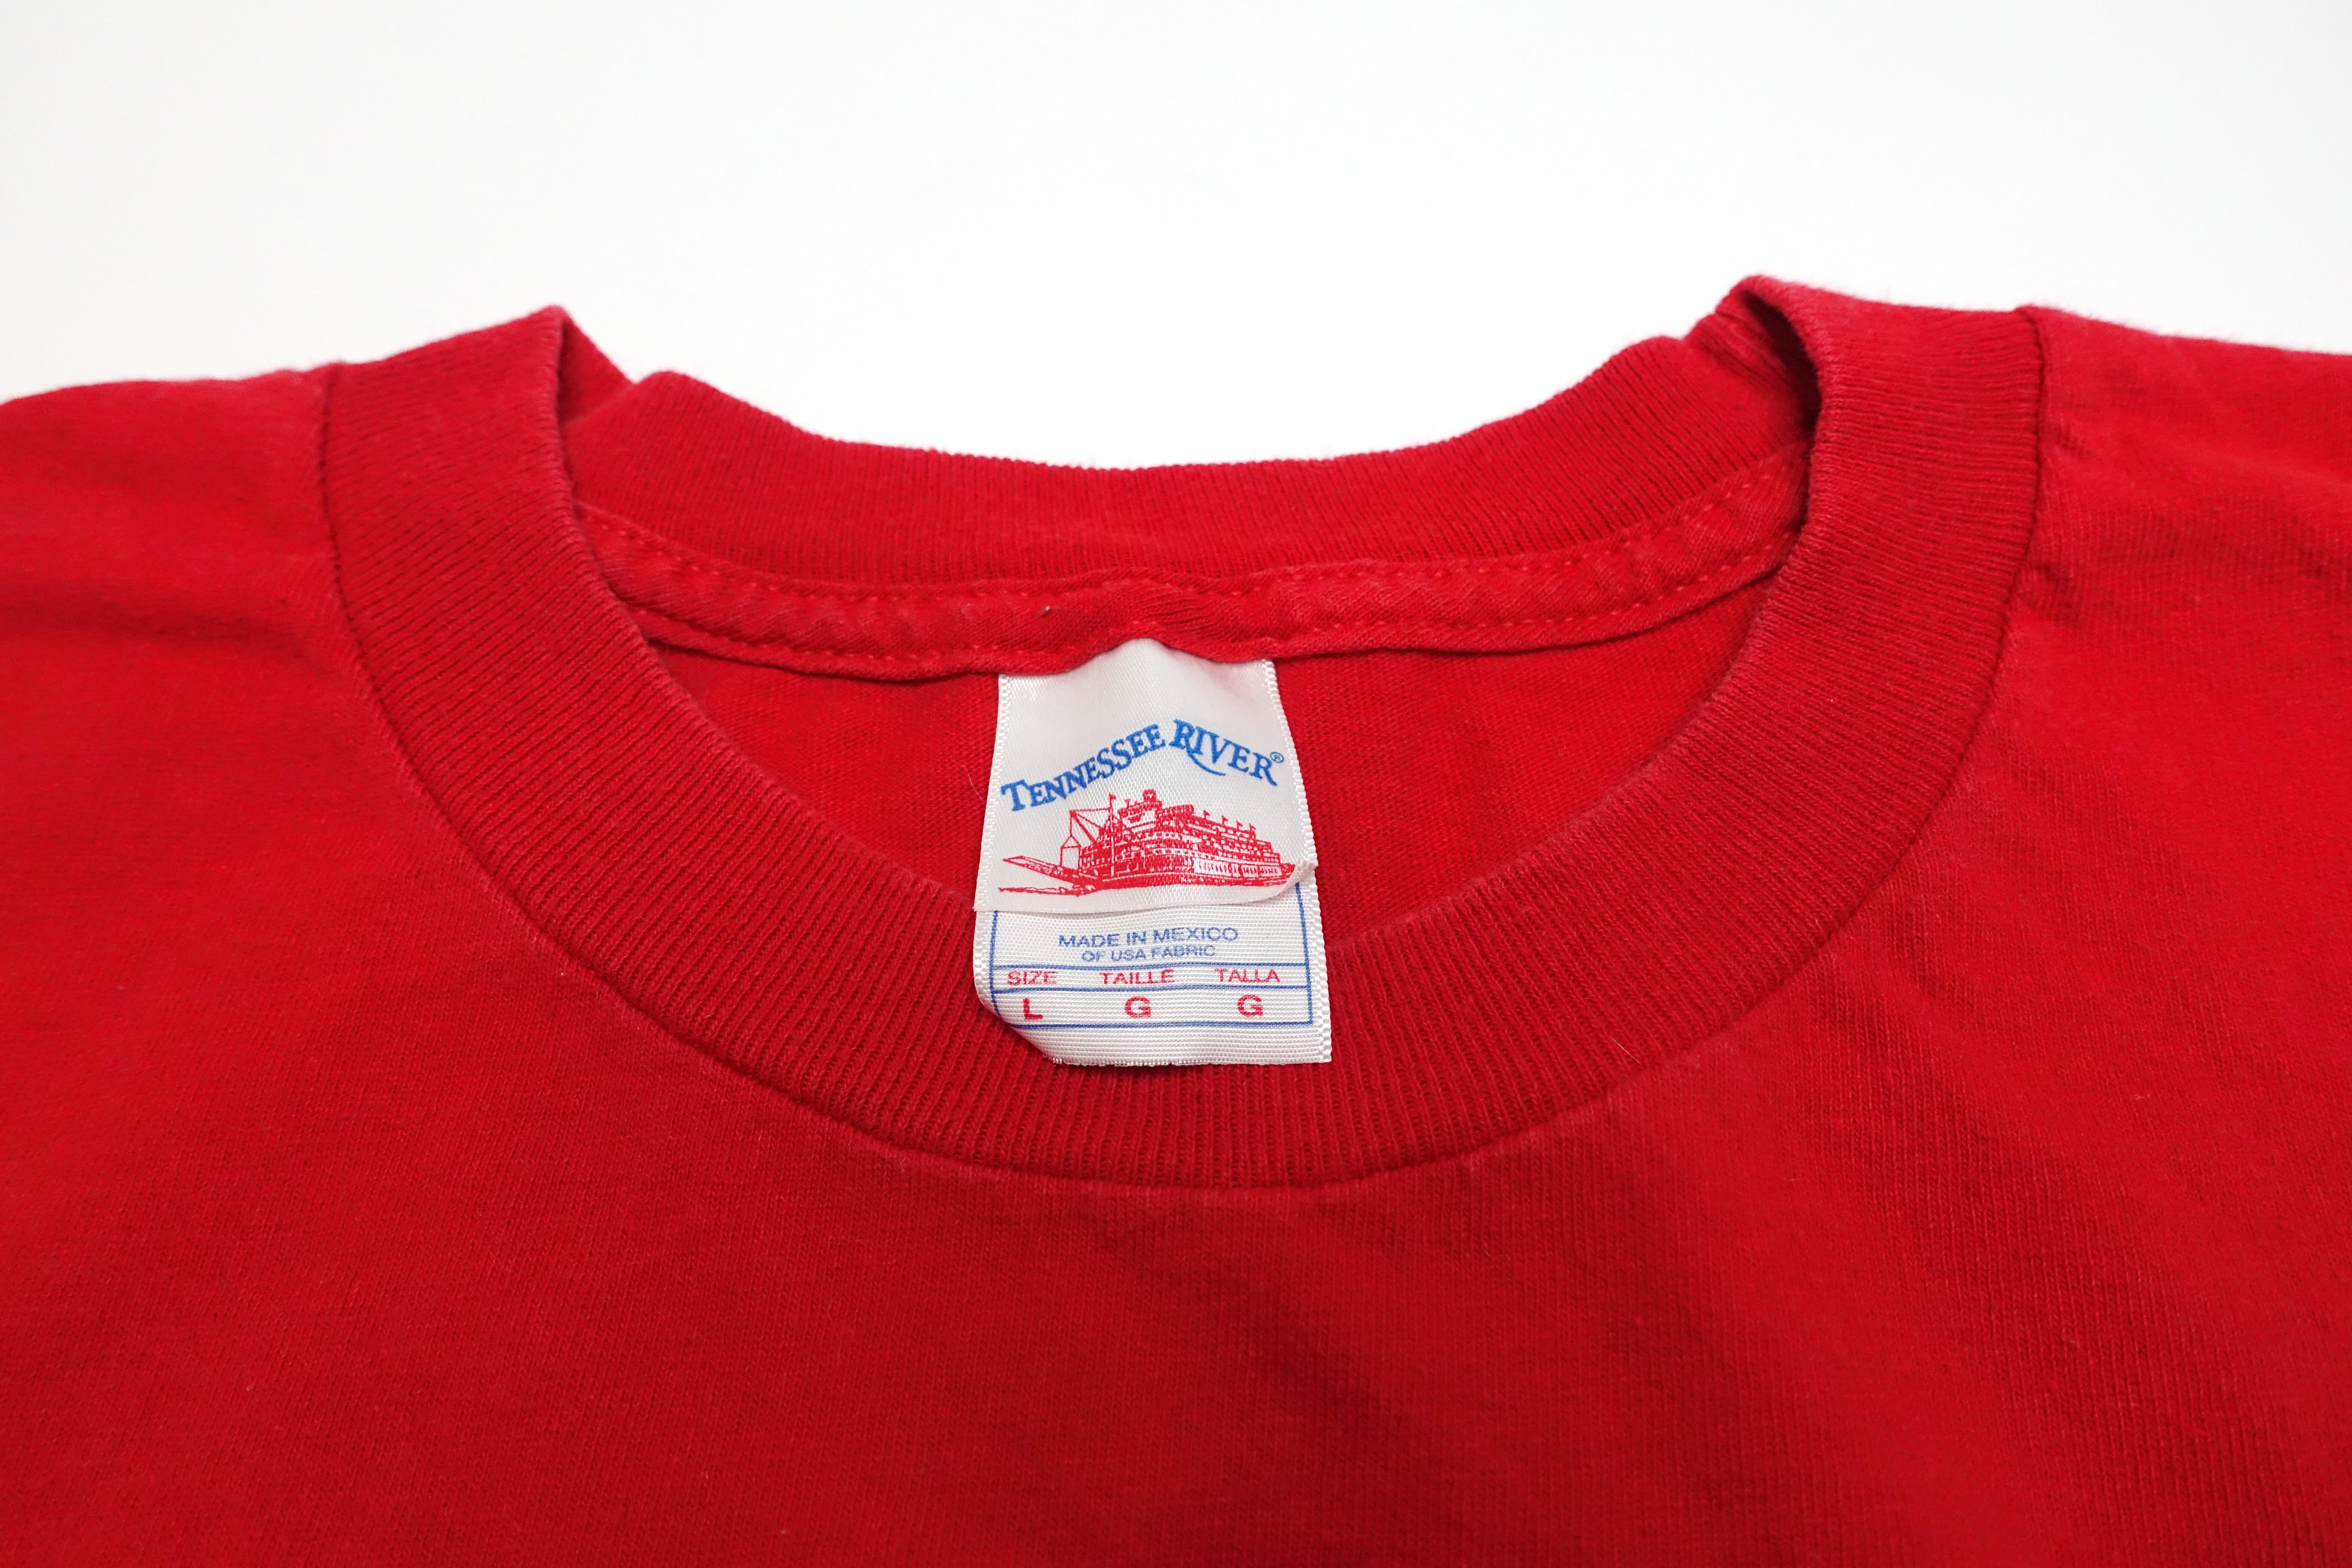 Wilco ‎– Sky Blue Sky Lines 2007 Tour Red Shirt Size Large